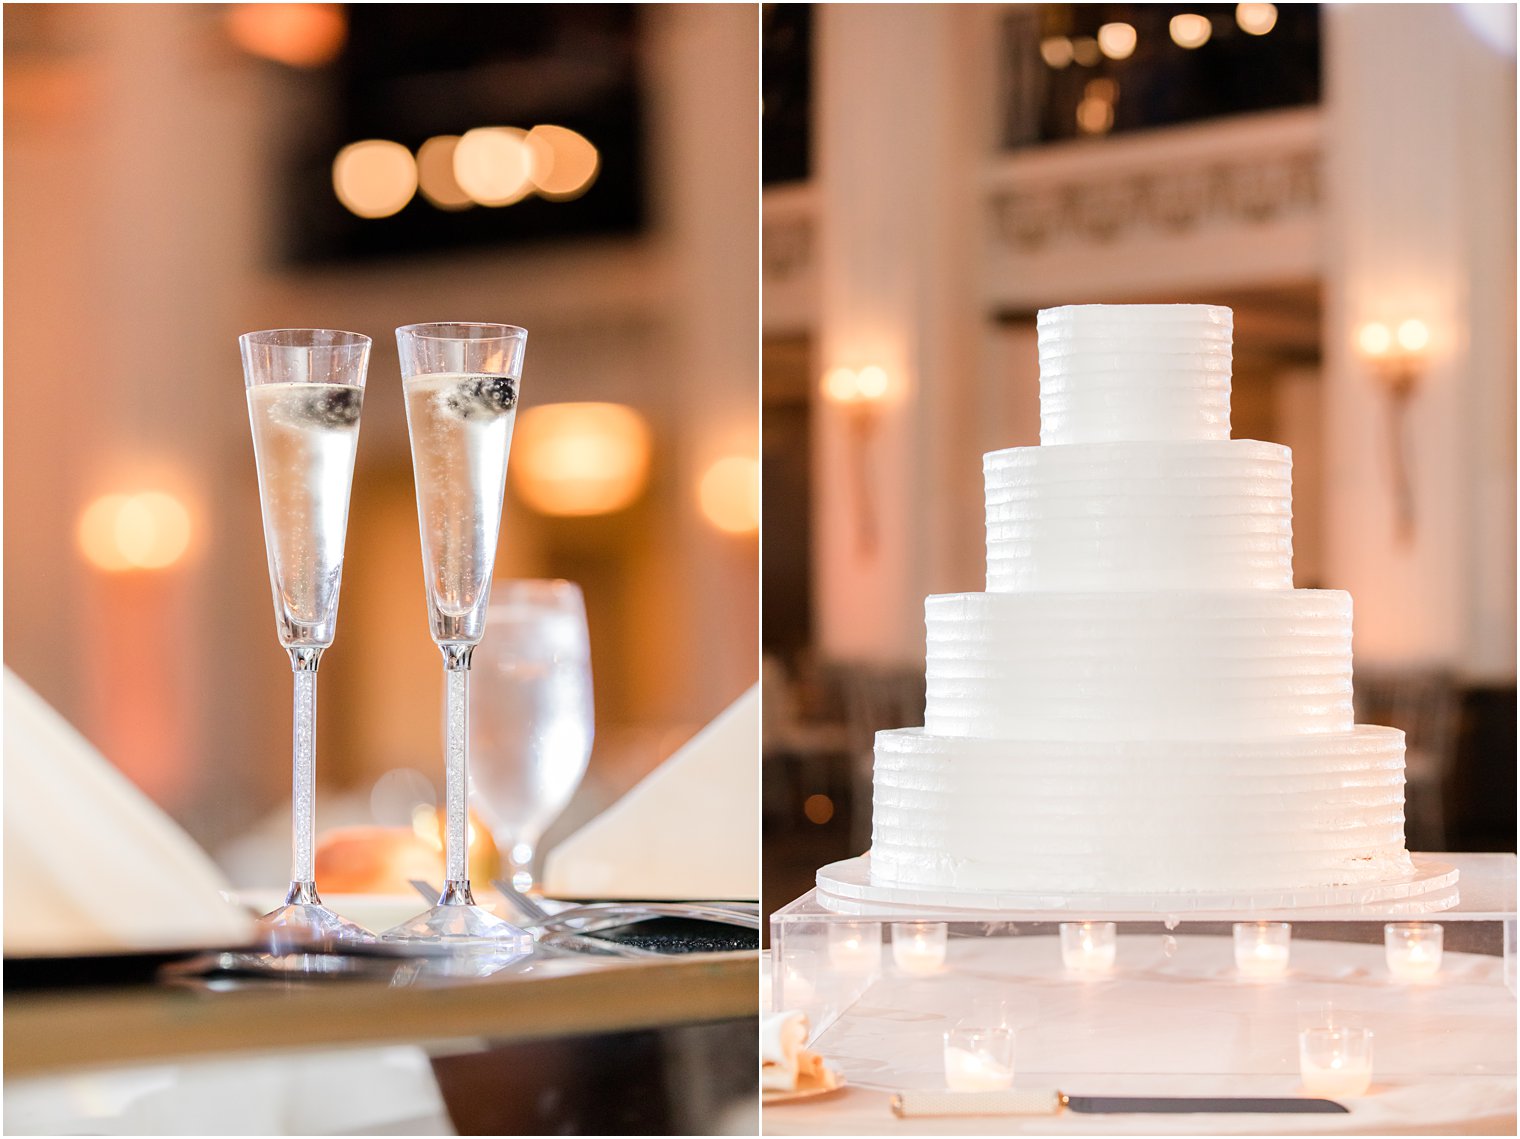 classic tiered wedding cake with white icing and champagne glasses